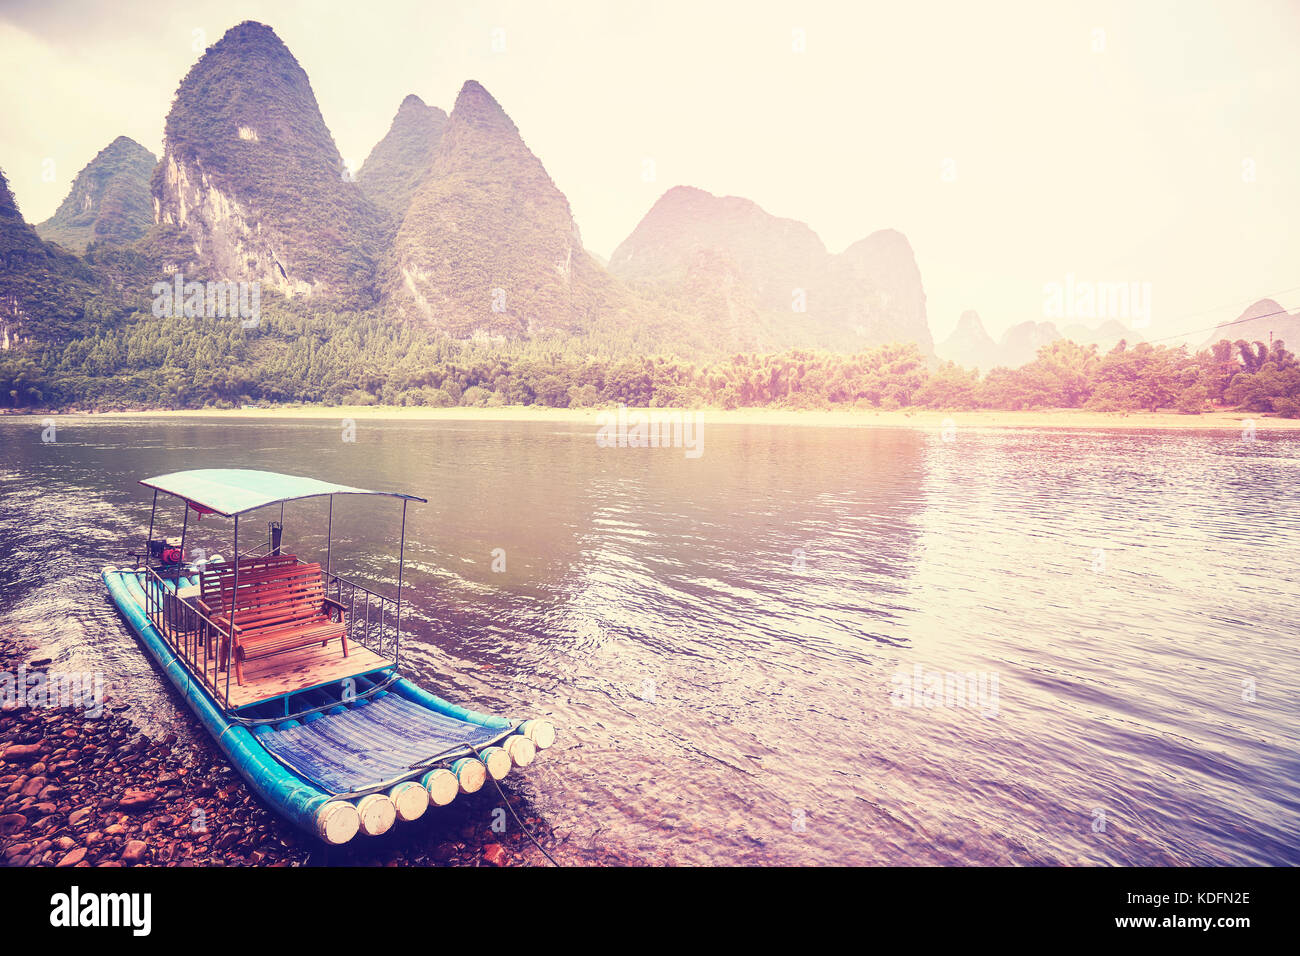 Vintage stylized picture of a bamboo raft at Li River, Xingping, China. Stock Photo